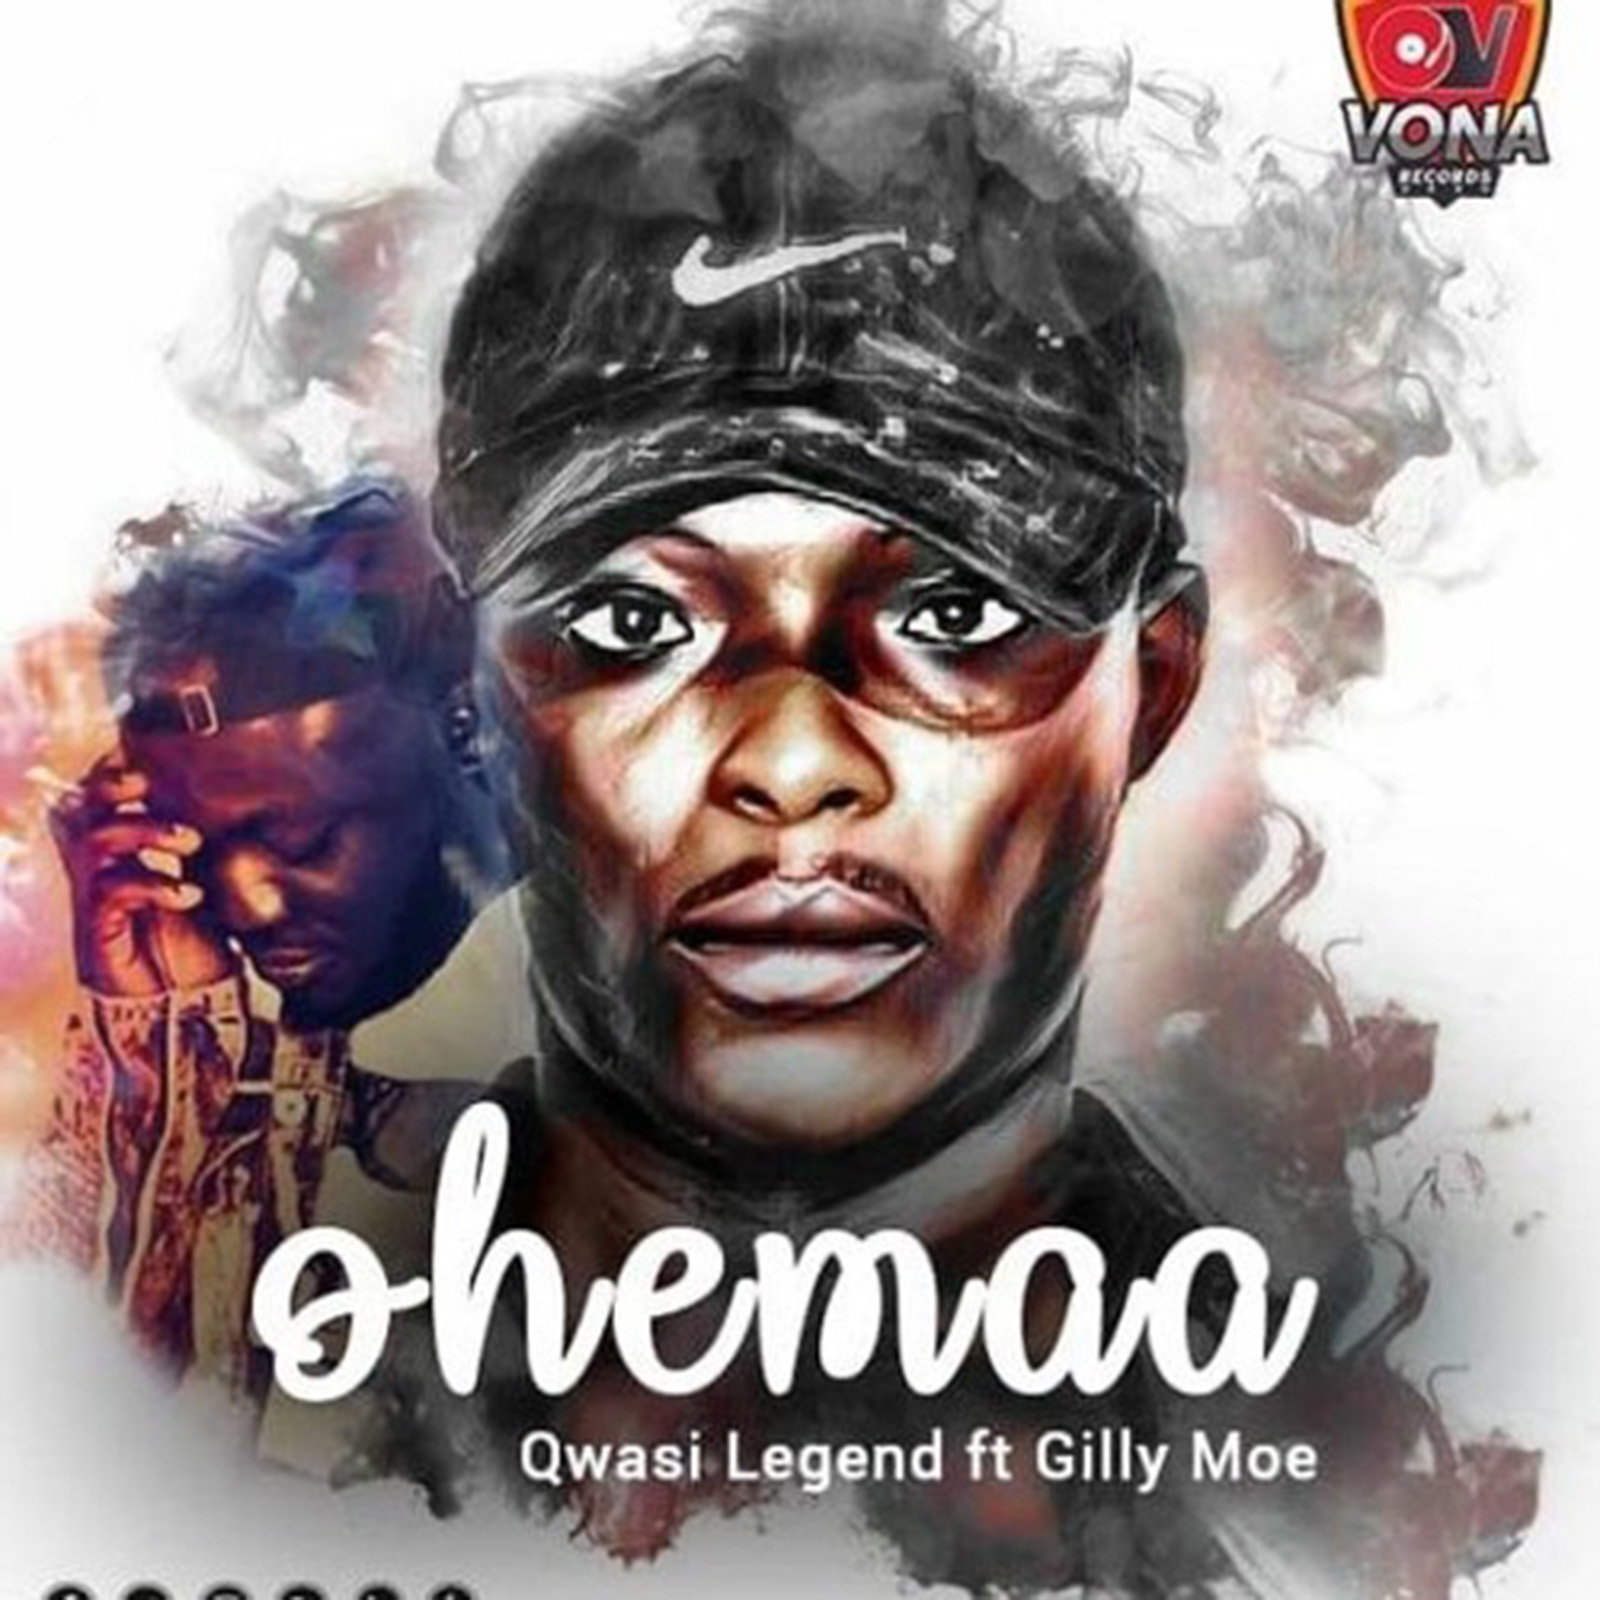 Ohemaa by Qwasi Legend feat. Gilly Moe